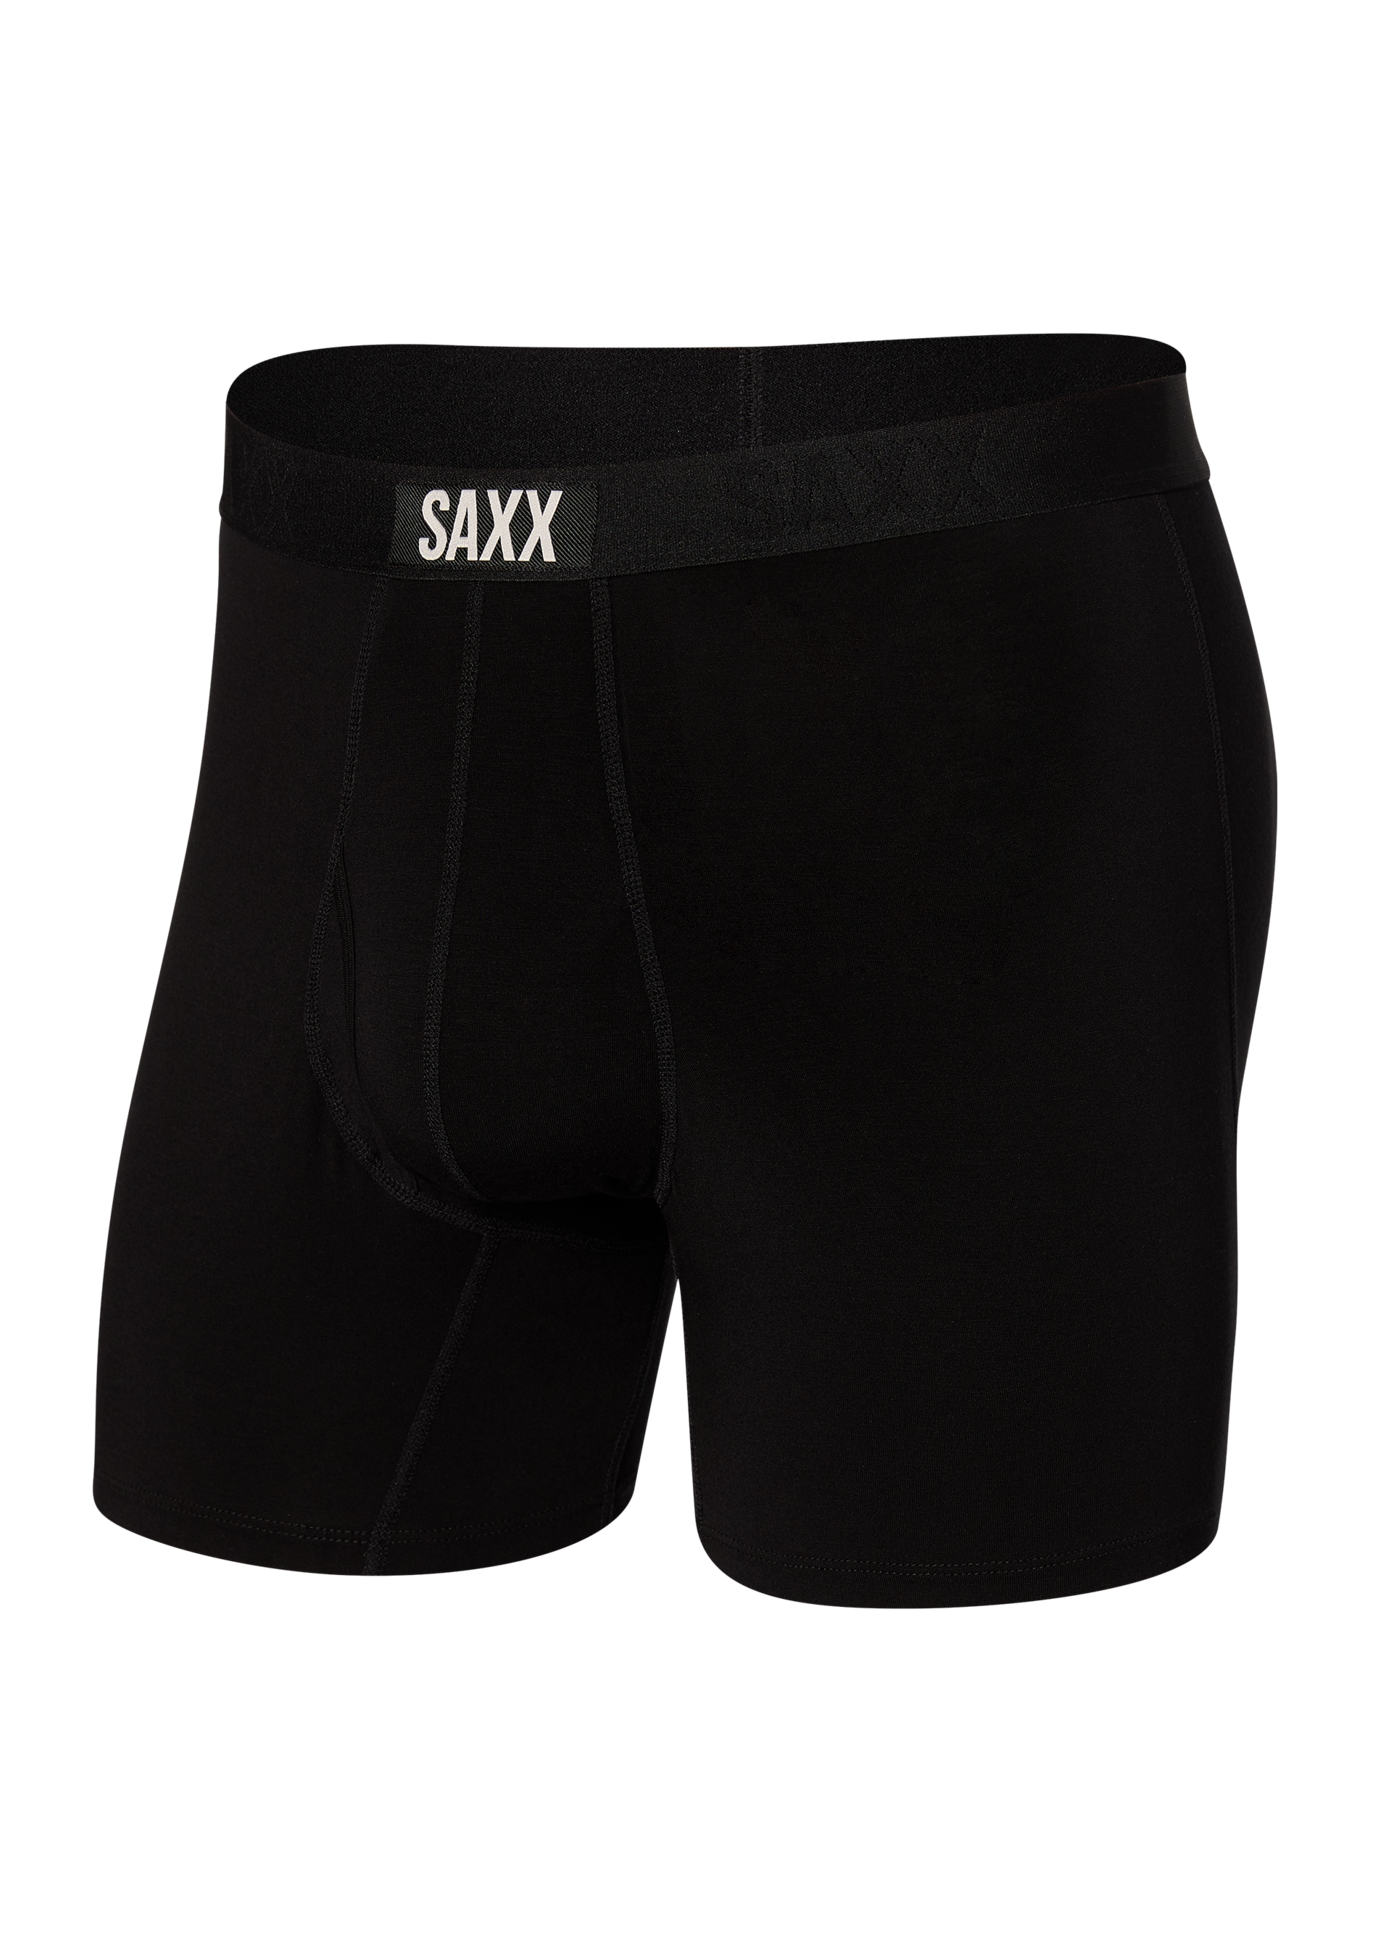 Ultra Boxer Brief (With Fly Opening) Underwear Saxx BBB S 